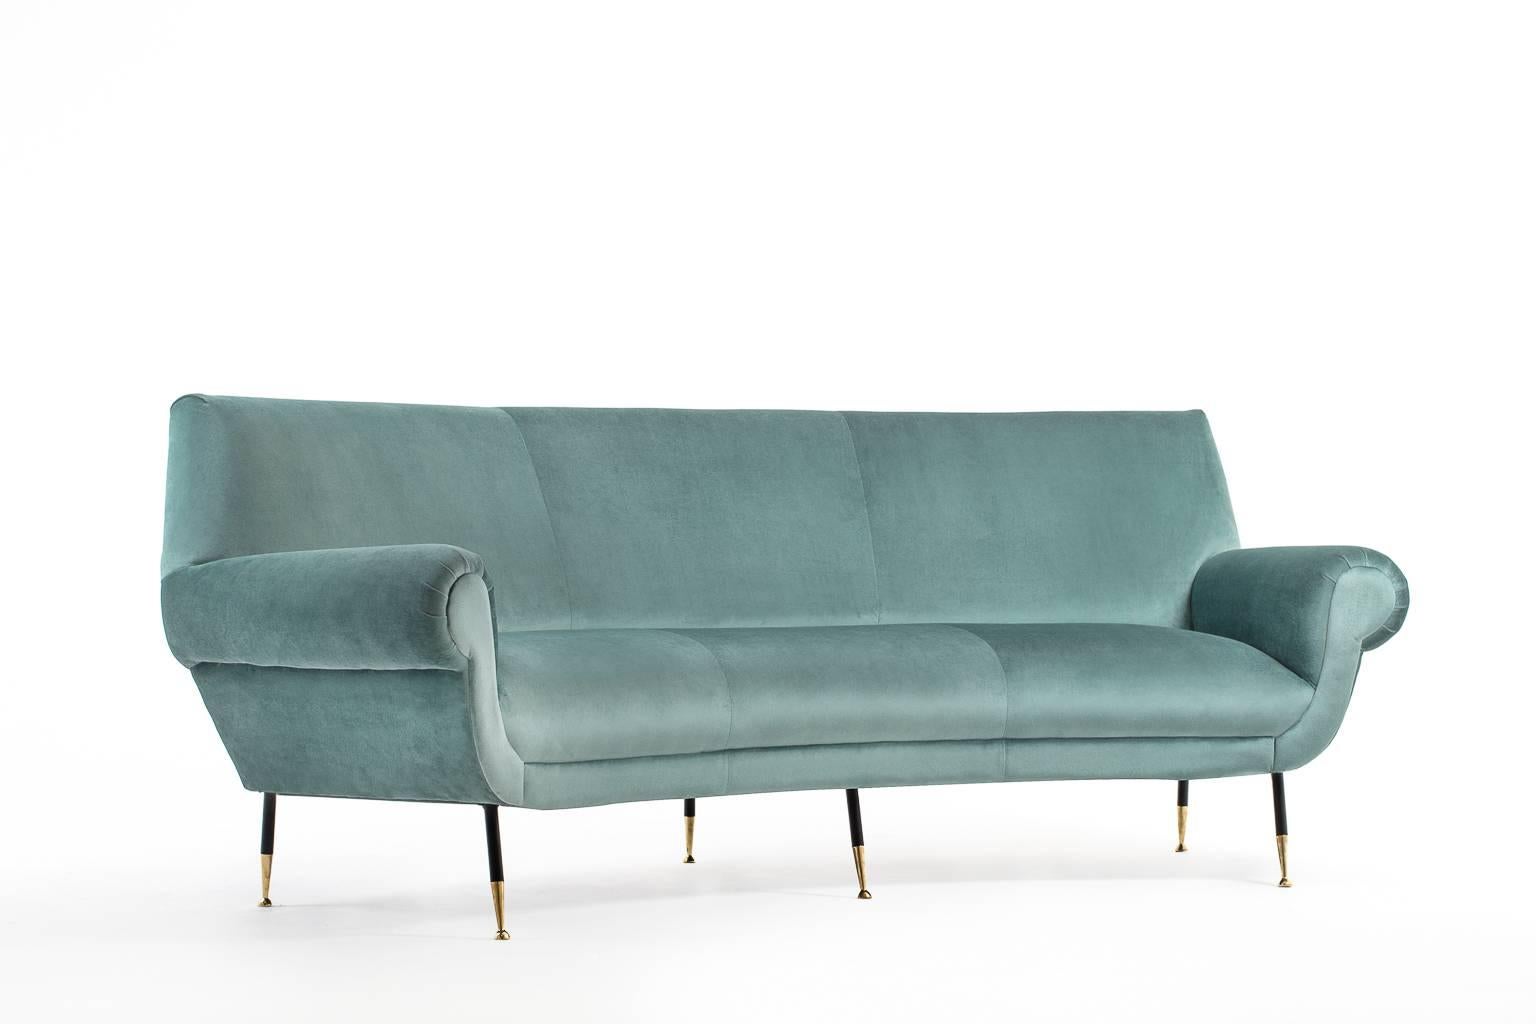 Stunning curved three-seat sofa by Gigi Radice for Minotti, Italy, 1950s. 
Reupholstered in a high quality aqua green velvet from the collection of Elitis Paris which provides a very chic and soft feeling. Very comfortable and relaxed seating. All